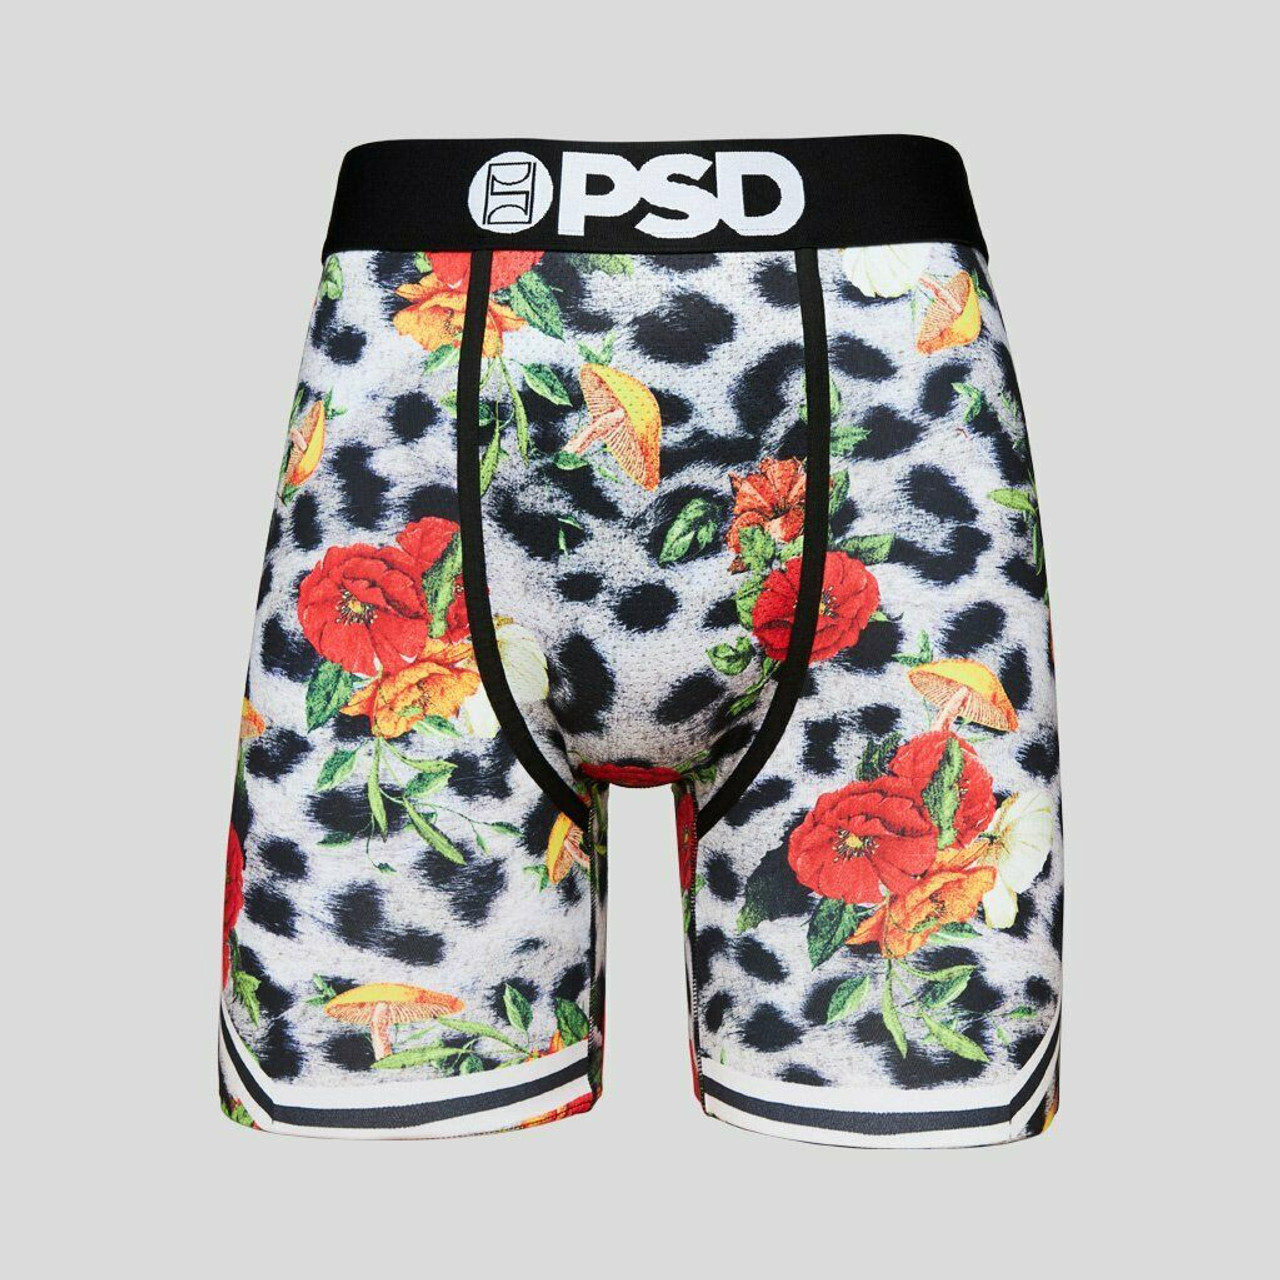 PSD Striped Floral Fur Leopard Animal Athletic Boxers Briefs